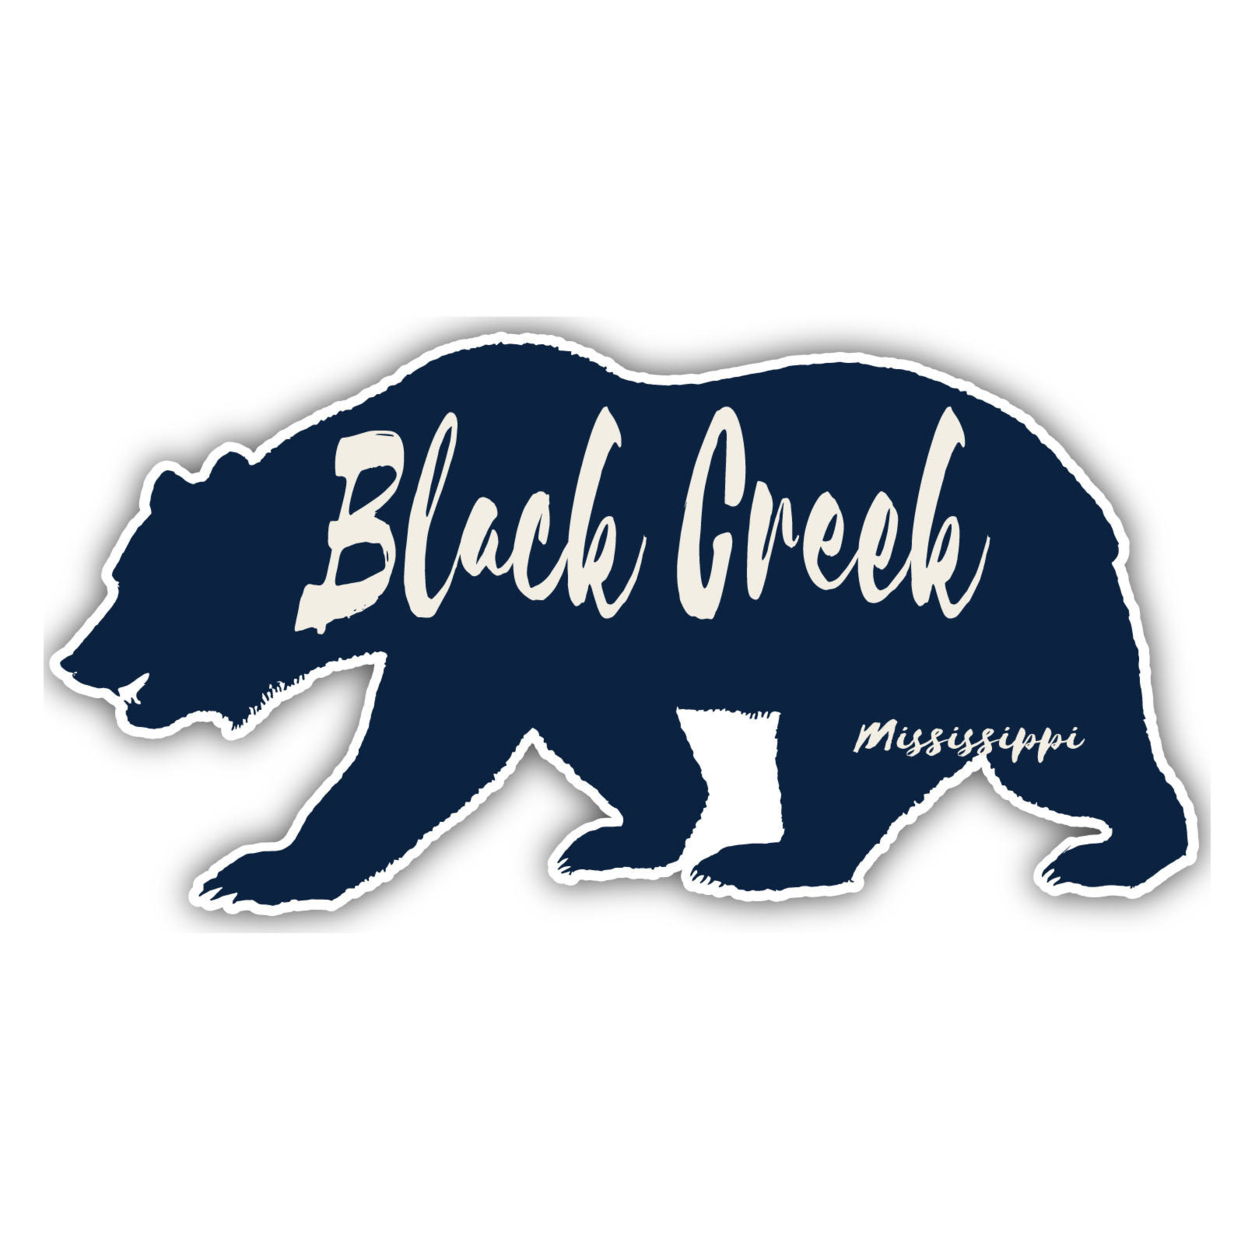 Black Creek Mississippi Souvenir Decorative Stickers (Choose Theme And Size) - 4-Pack, 4-Inch, Bear